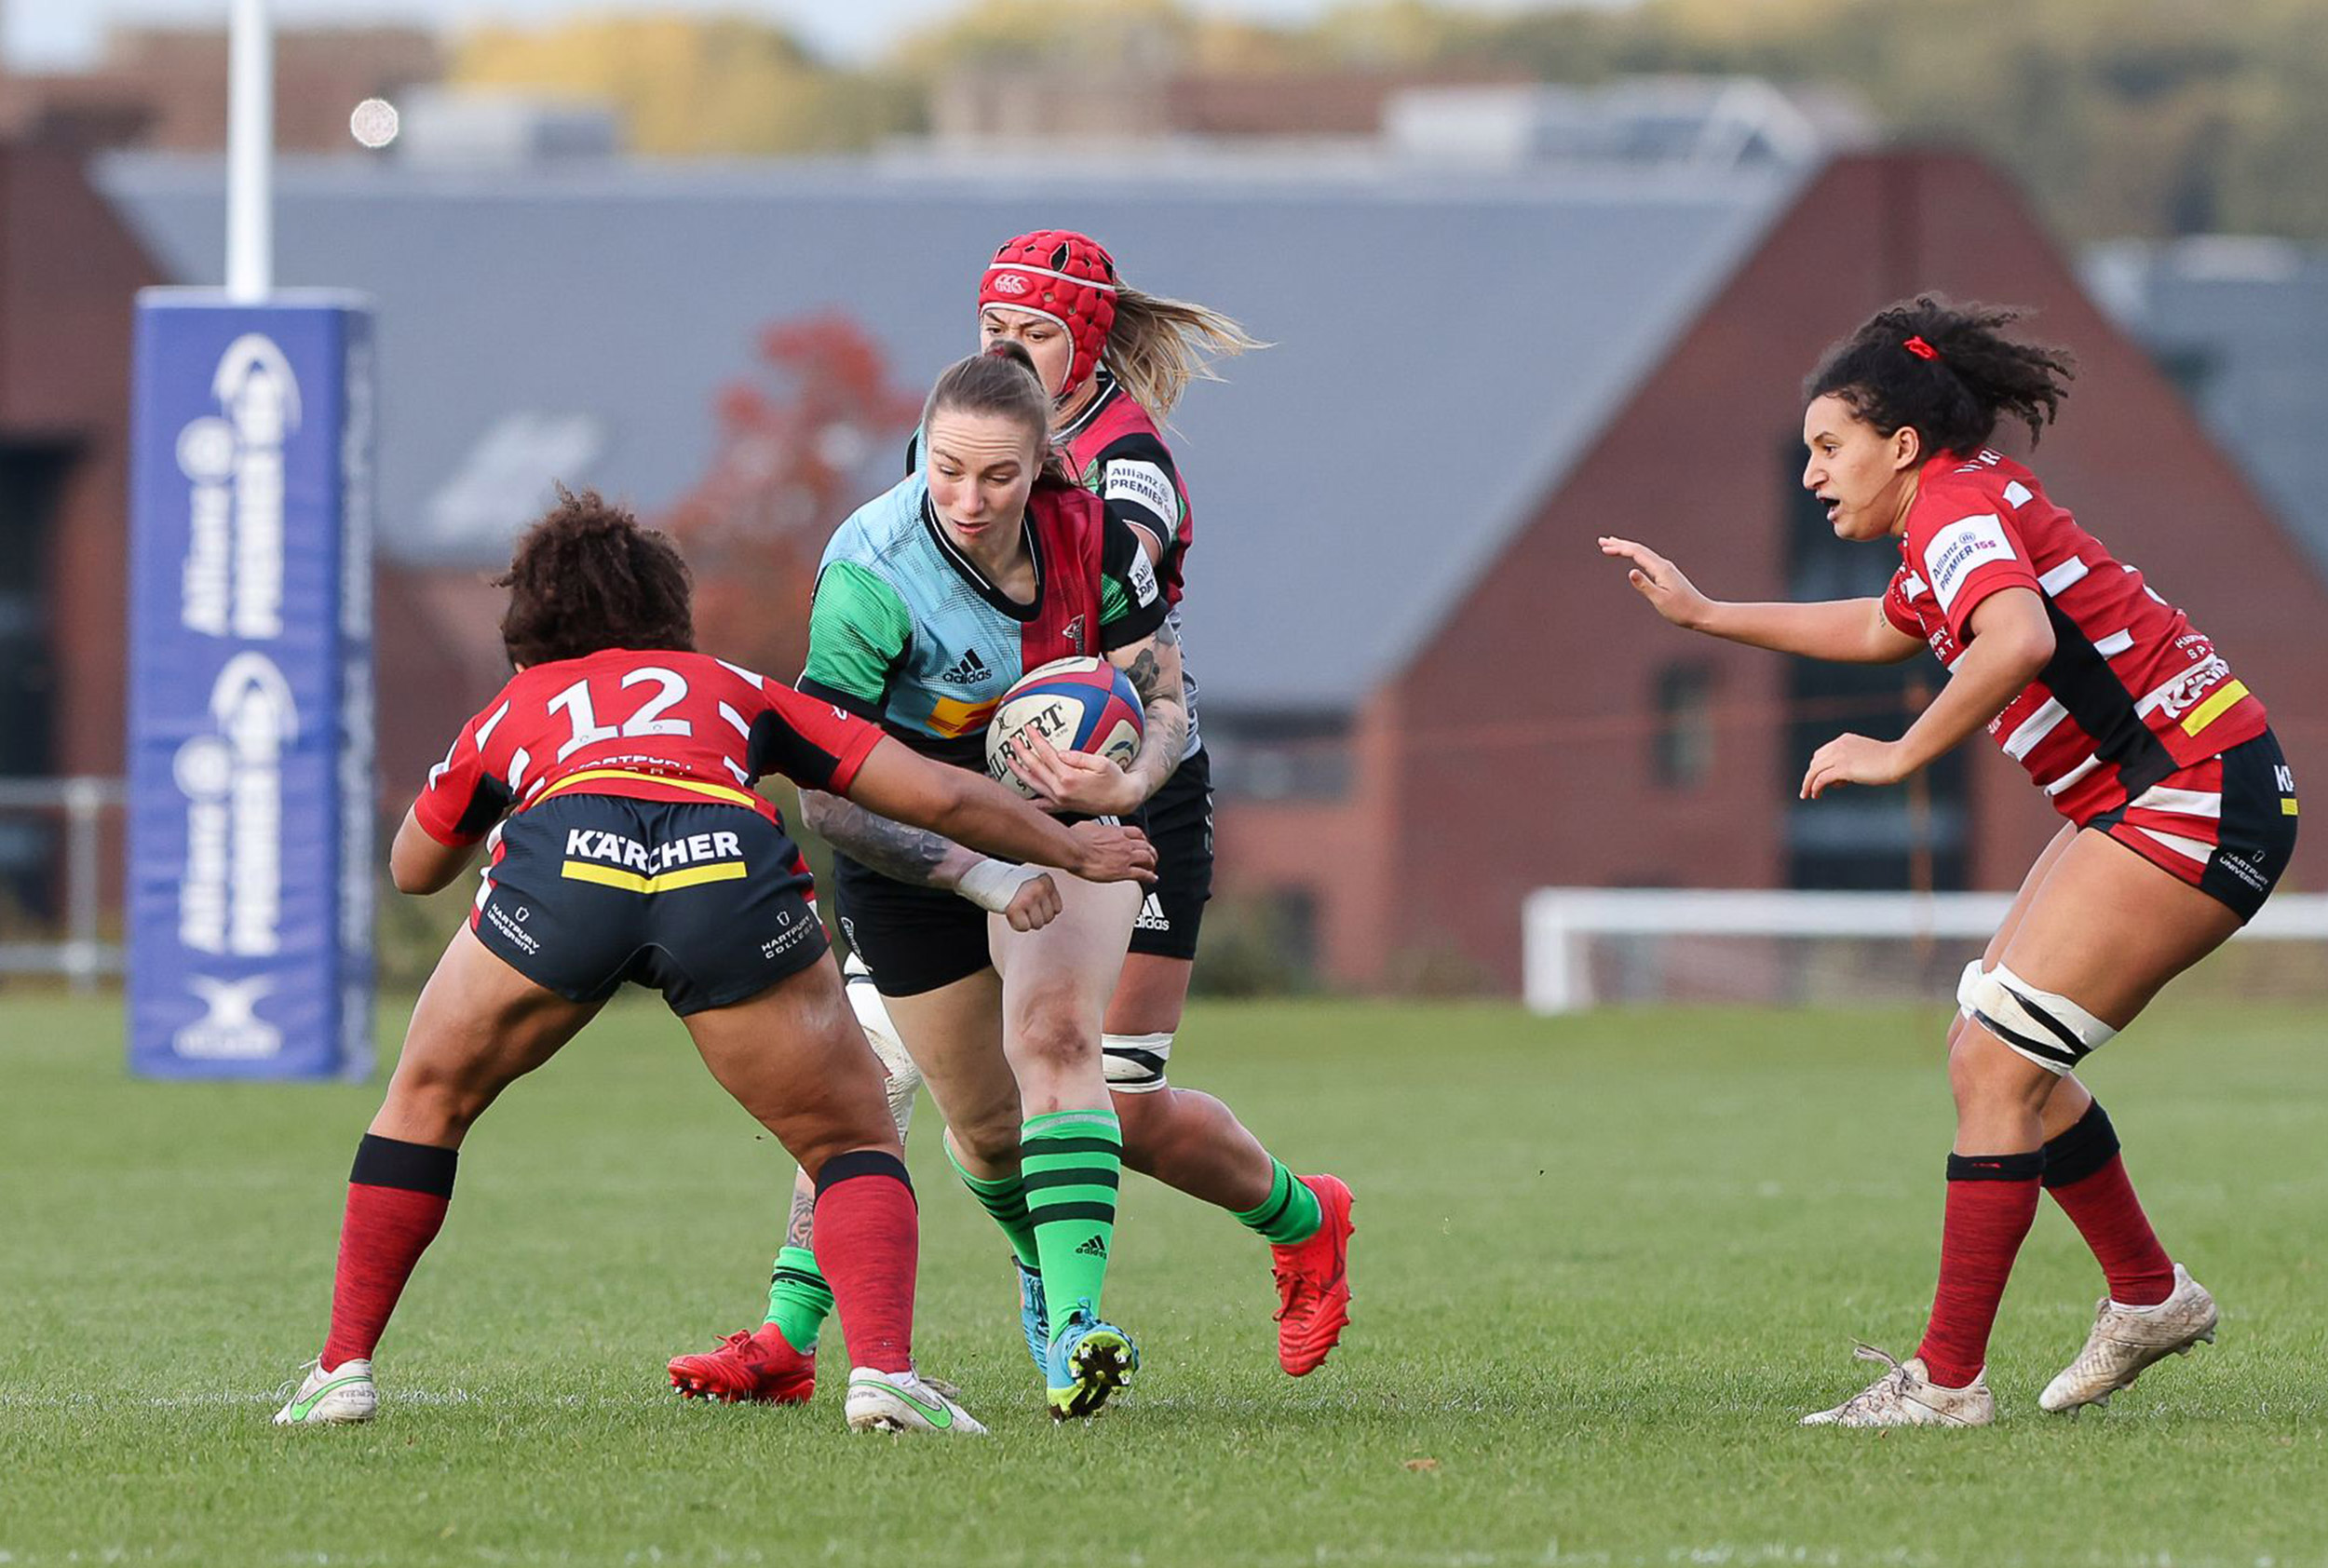 glorious day of two halves jade konkel rugby playing with women team female match